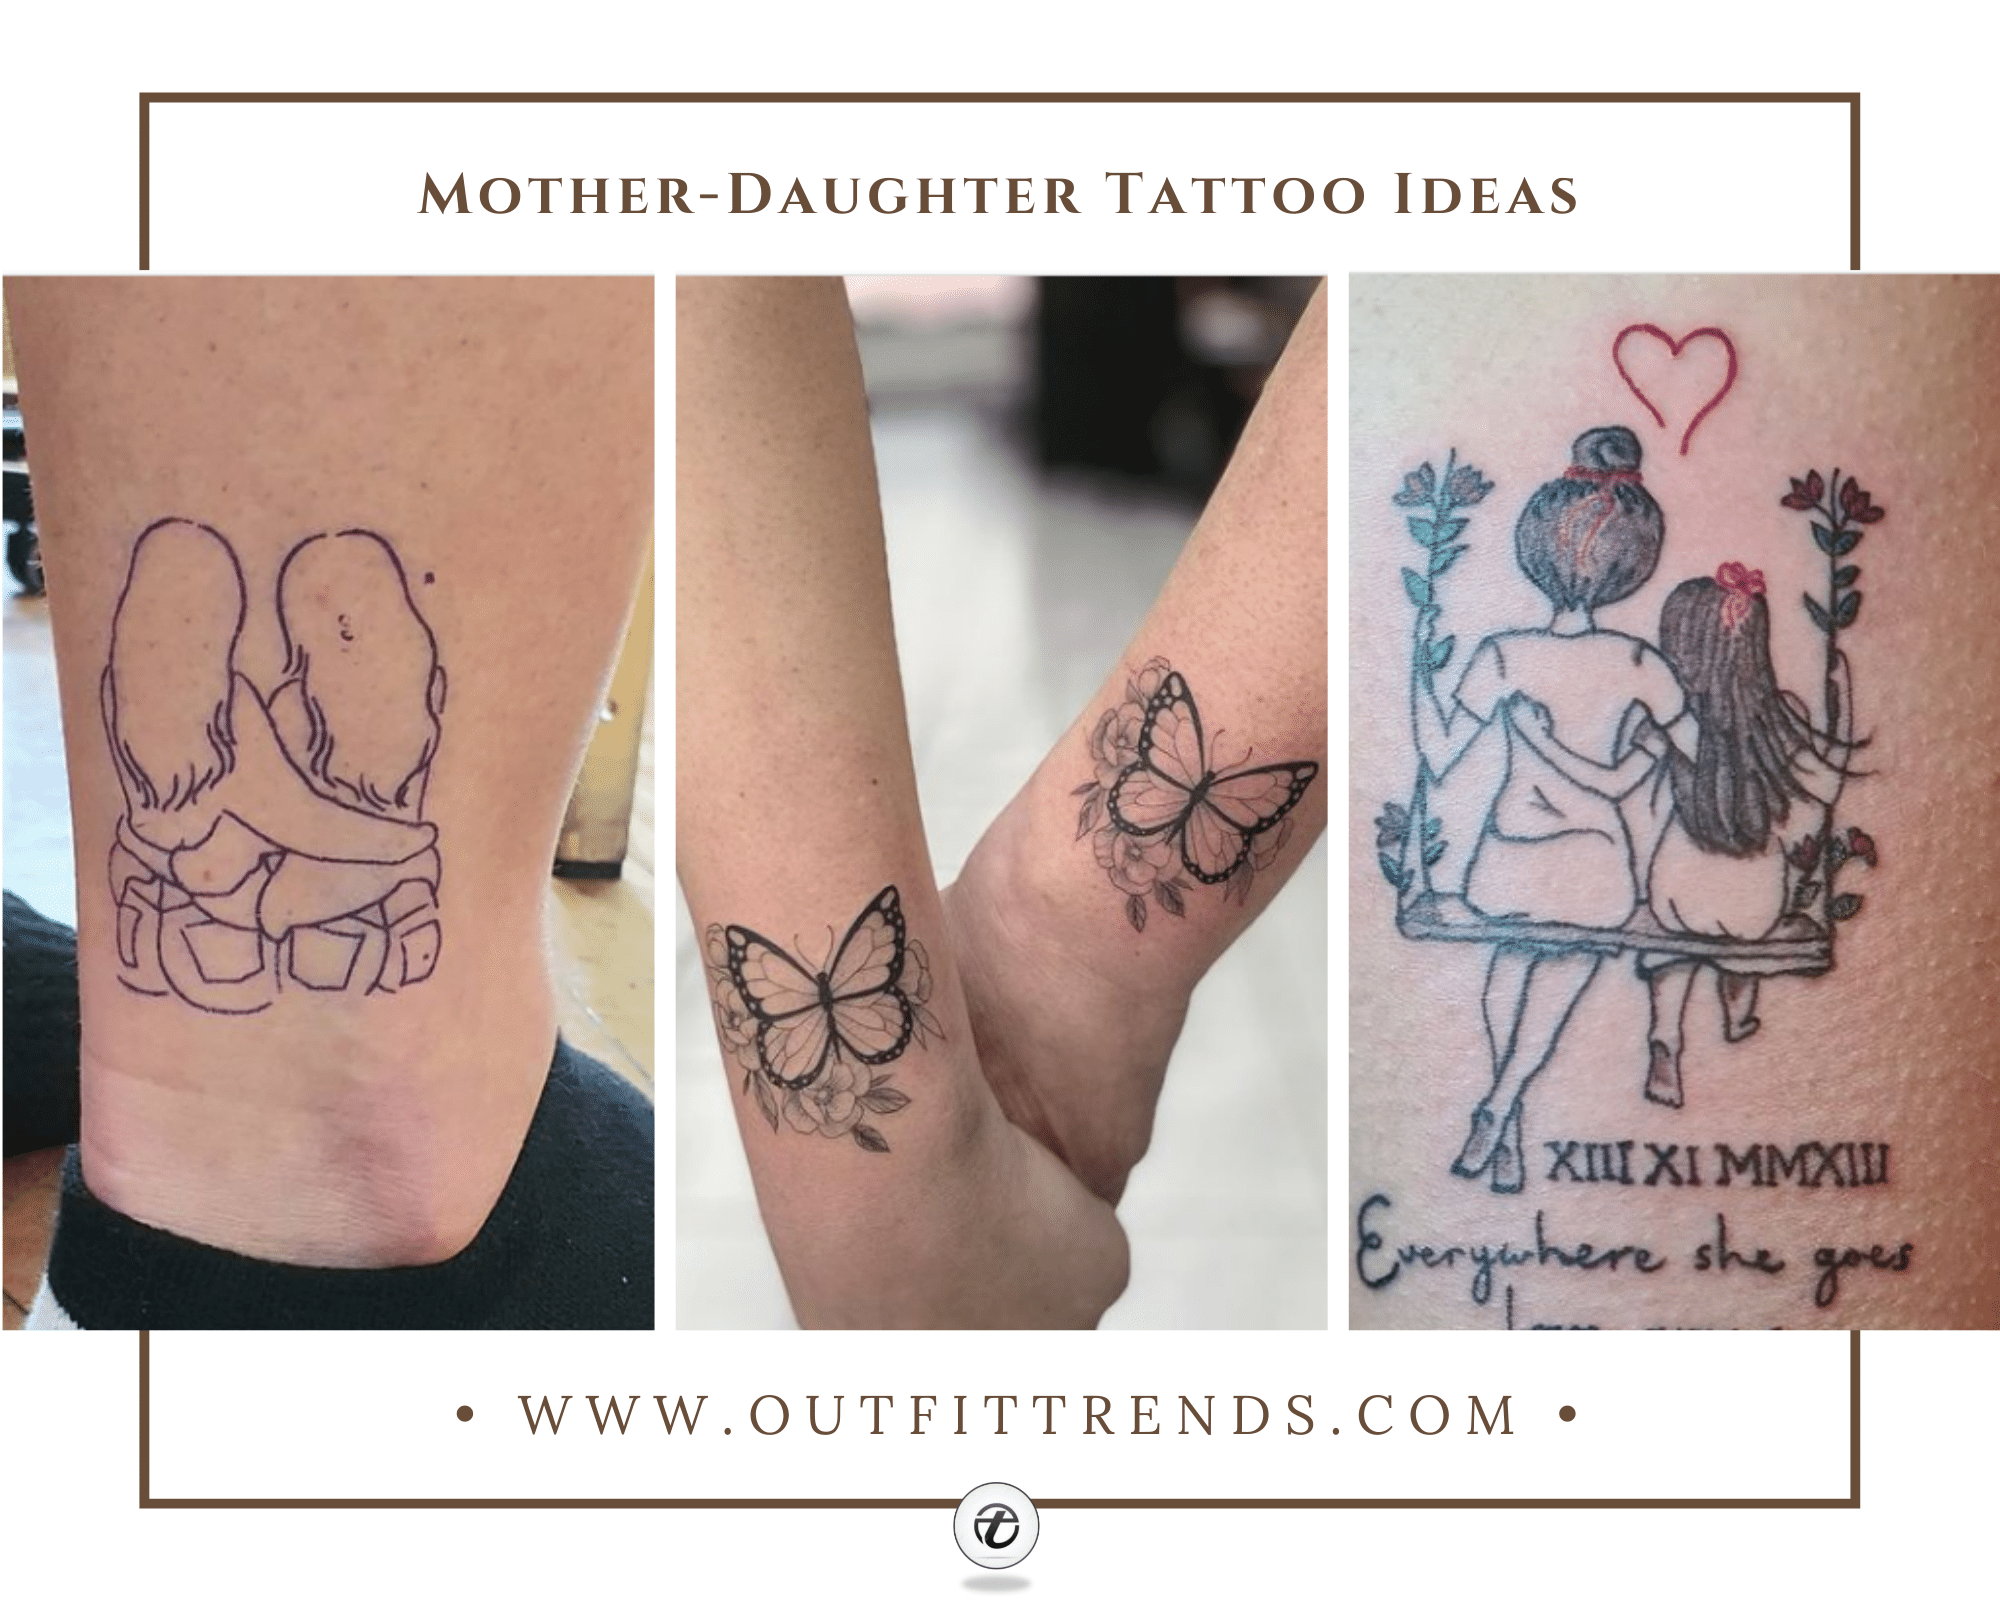 4. Meaningful Mother Daughter Tattoo Designs - wide 10